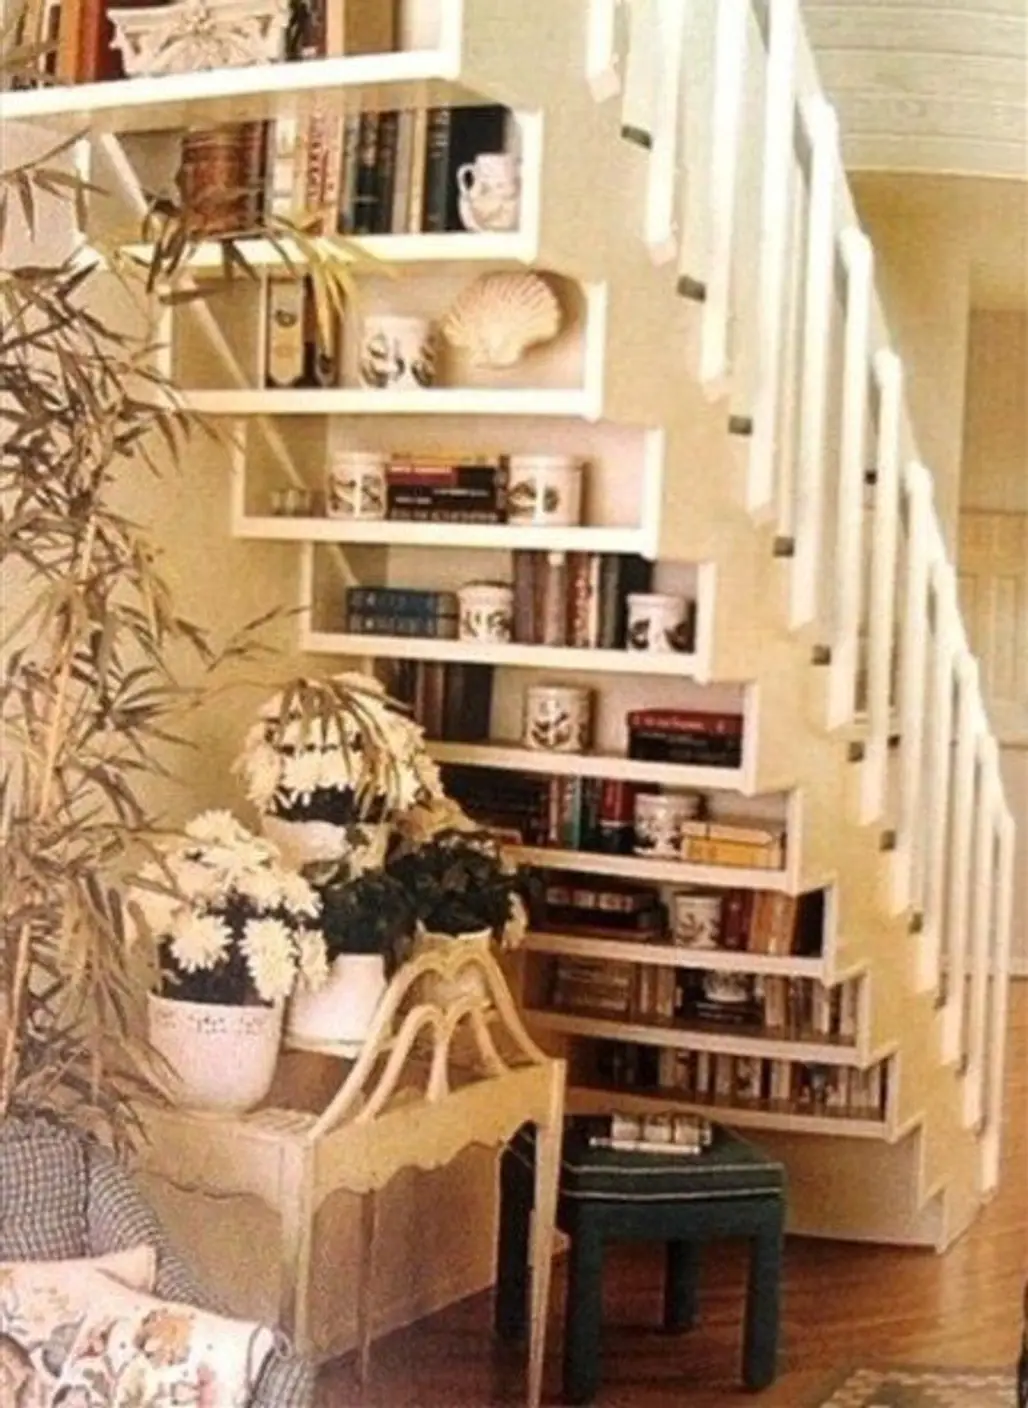 Another Way to Display Your Book Collection under the Stairs